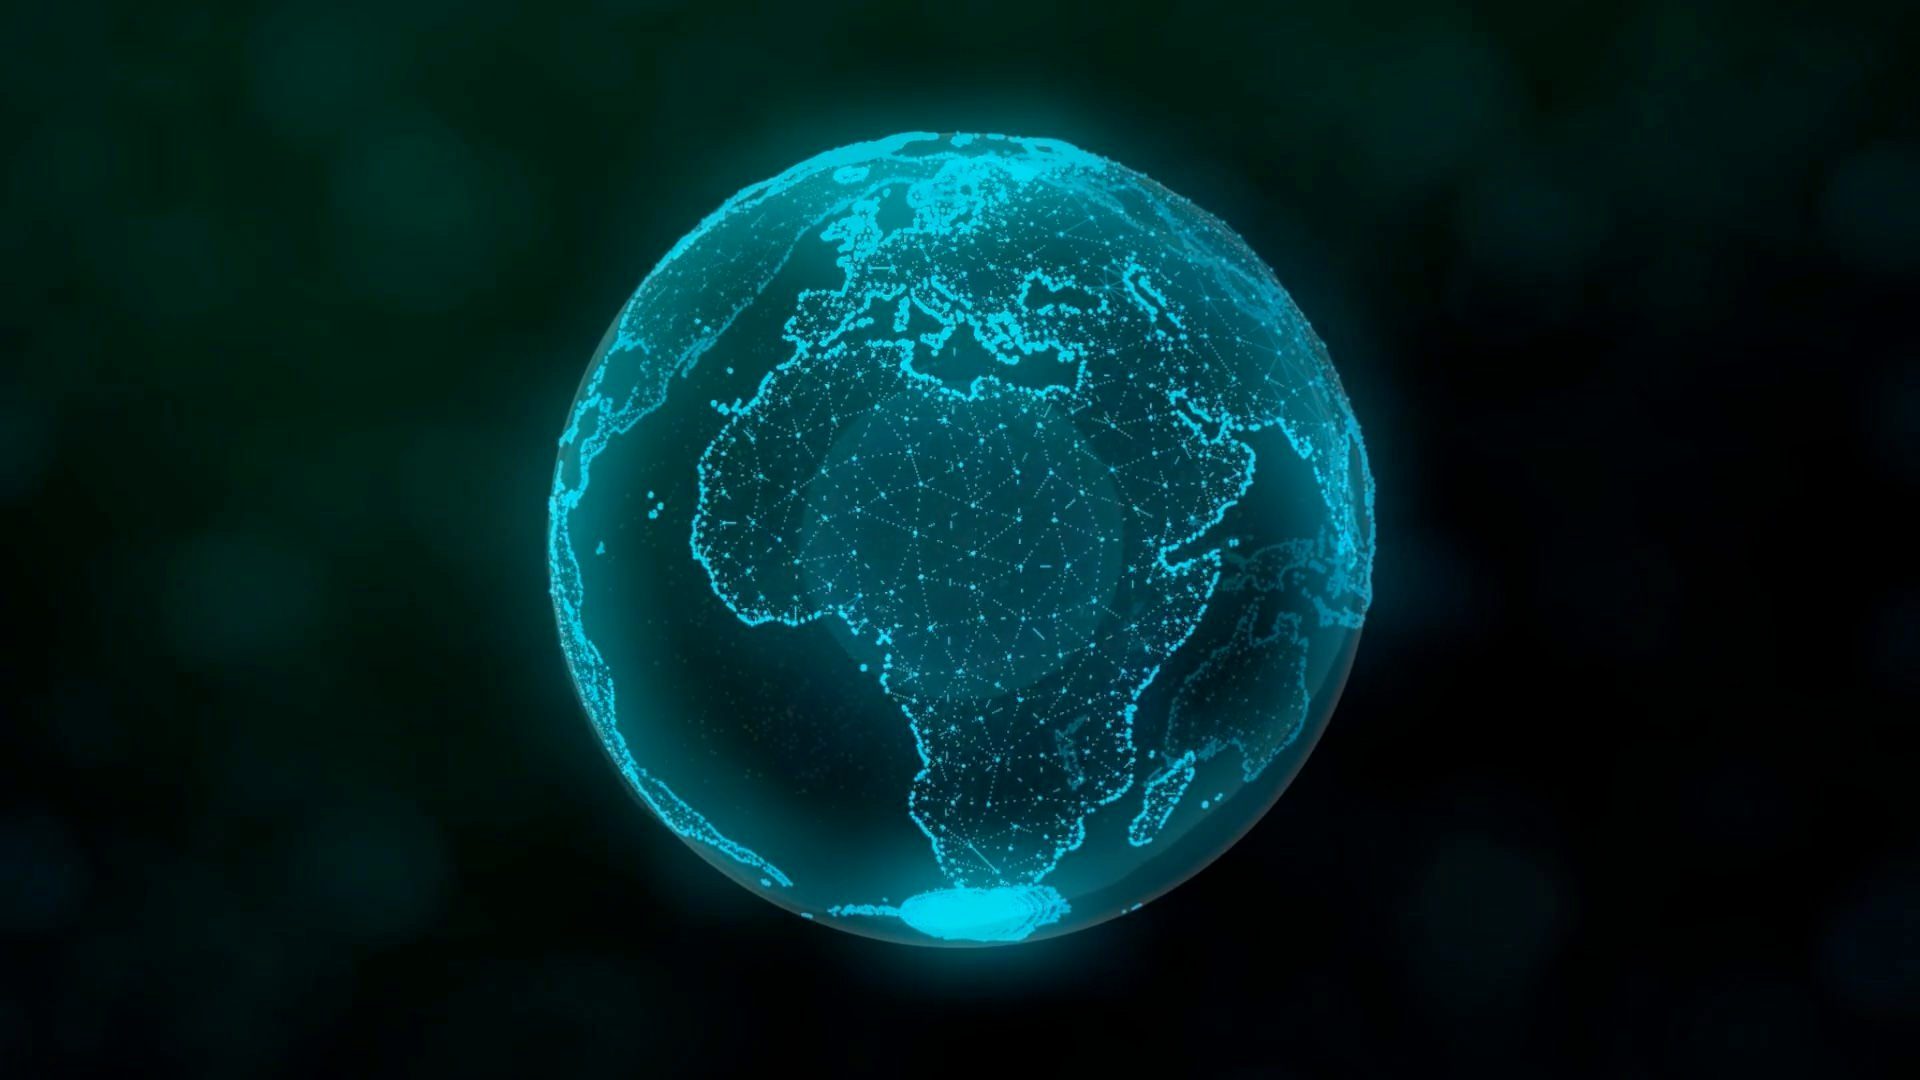 This image shows the earth and its connection, being part of Proteomics film